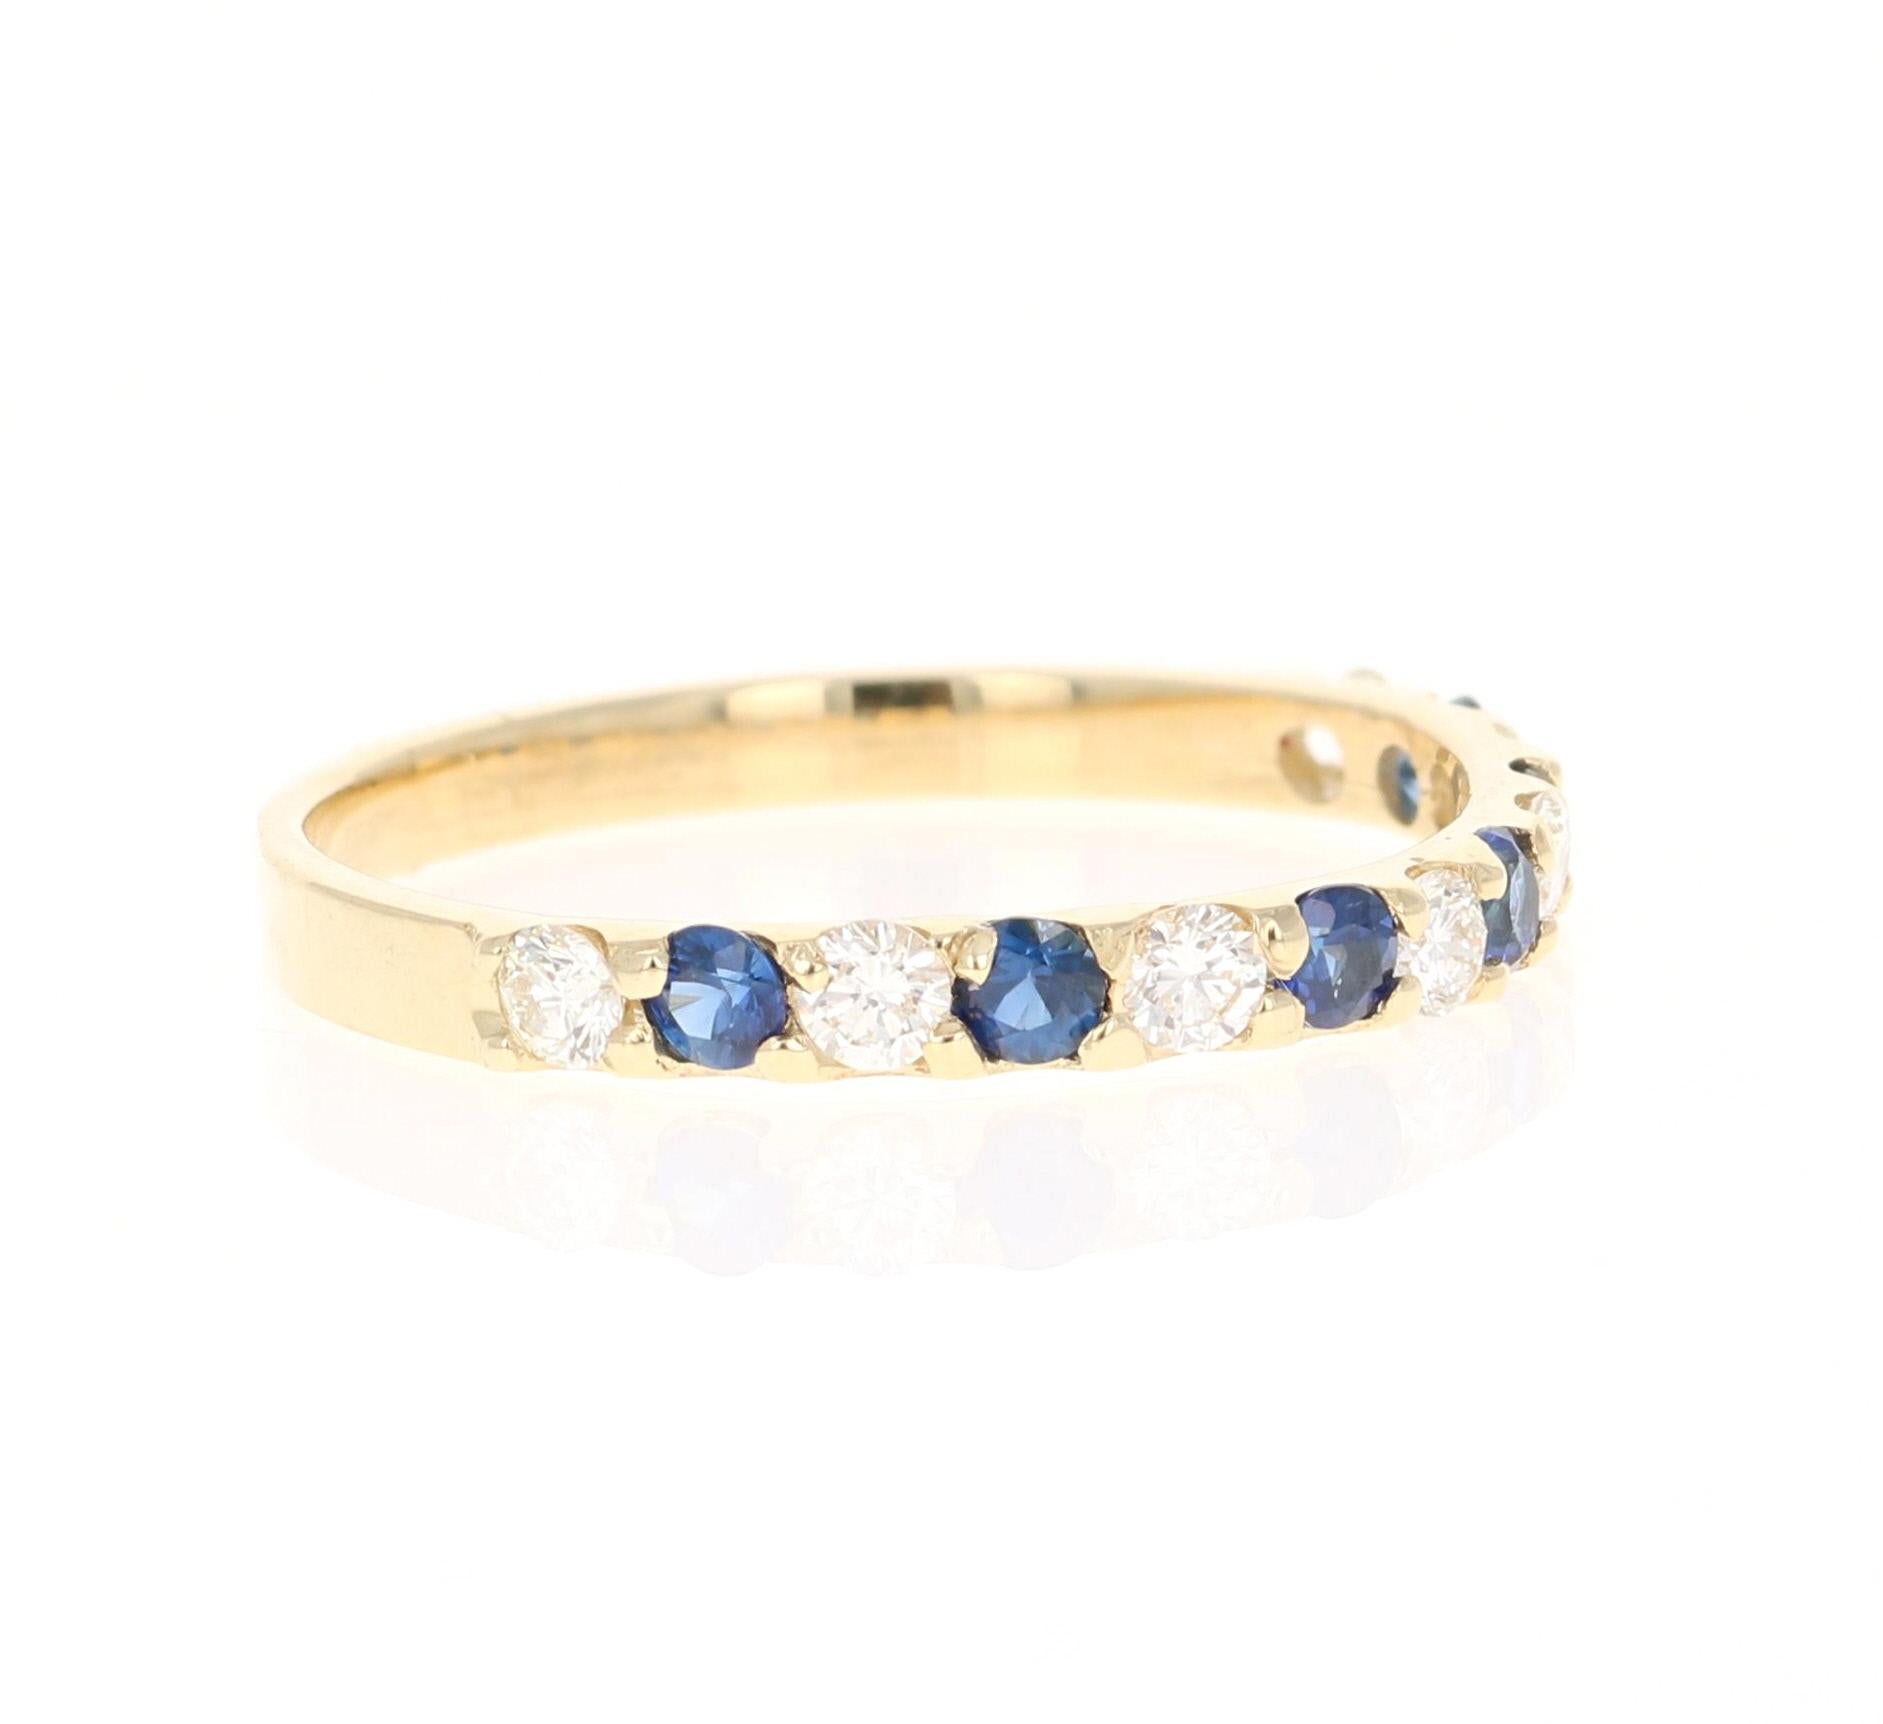 This ring has 6 Blue Sapphires that weigh 0.36 Carats and 7 Round Cut Diamonds that weigh 0.32 Carats. The clarity and color of the diamonds are VS-H. The total carat weight of the ring is 0.68 Carats. 

Crafted in 14 Karat Yellow Gold and is